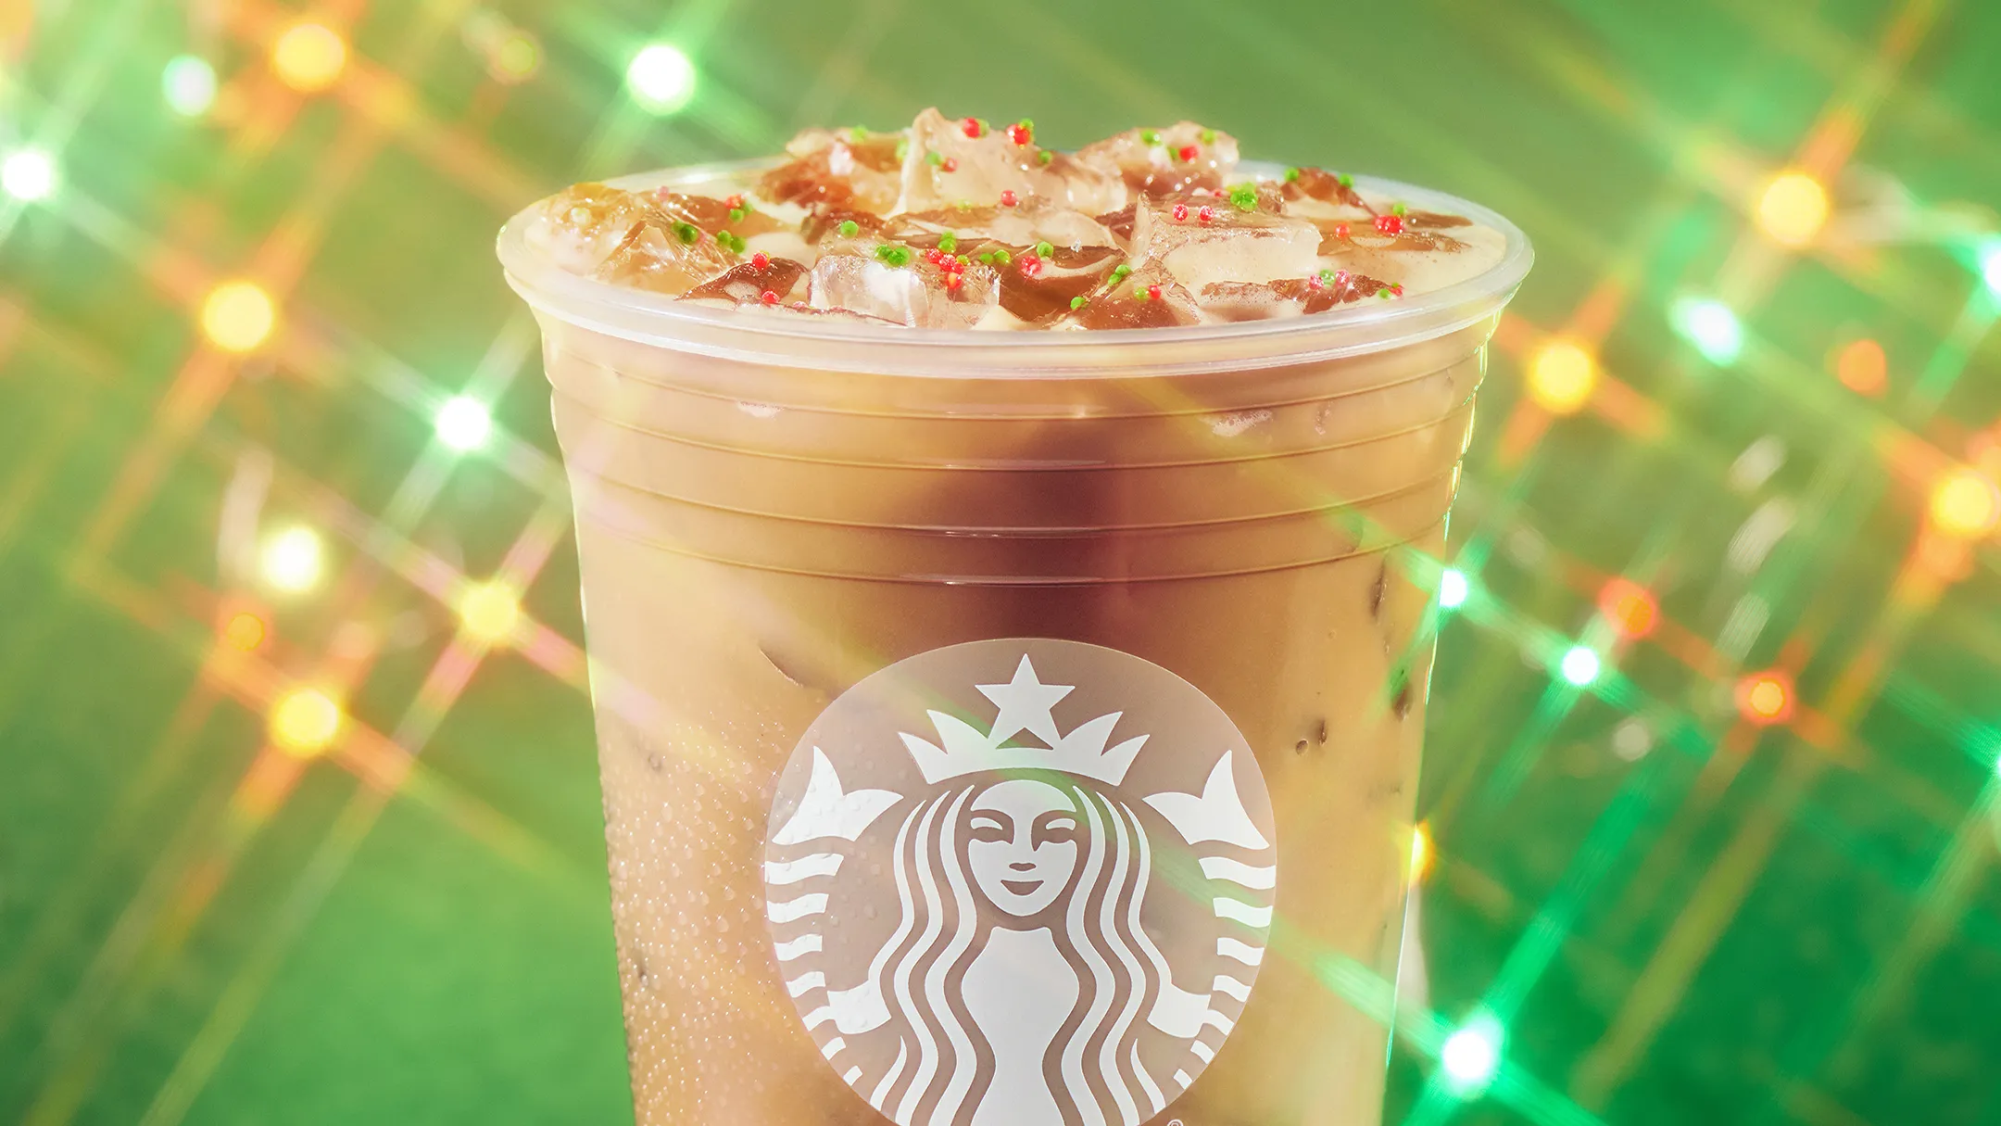 Sipping on Starbucks Holiday Drinks?